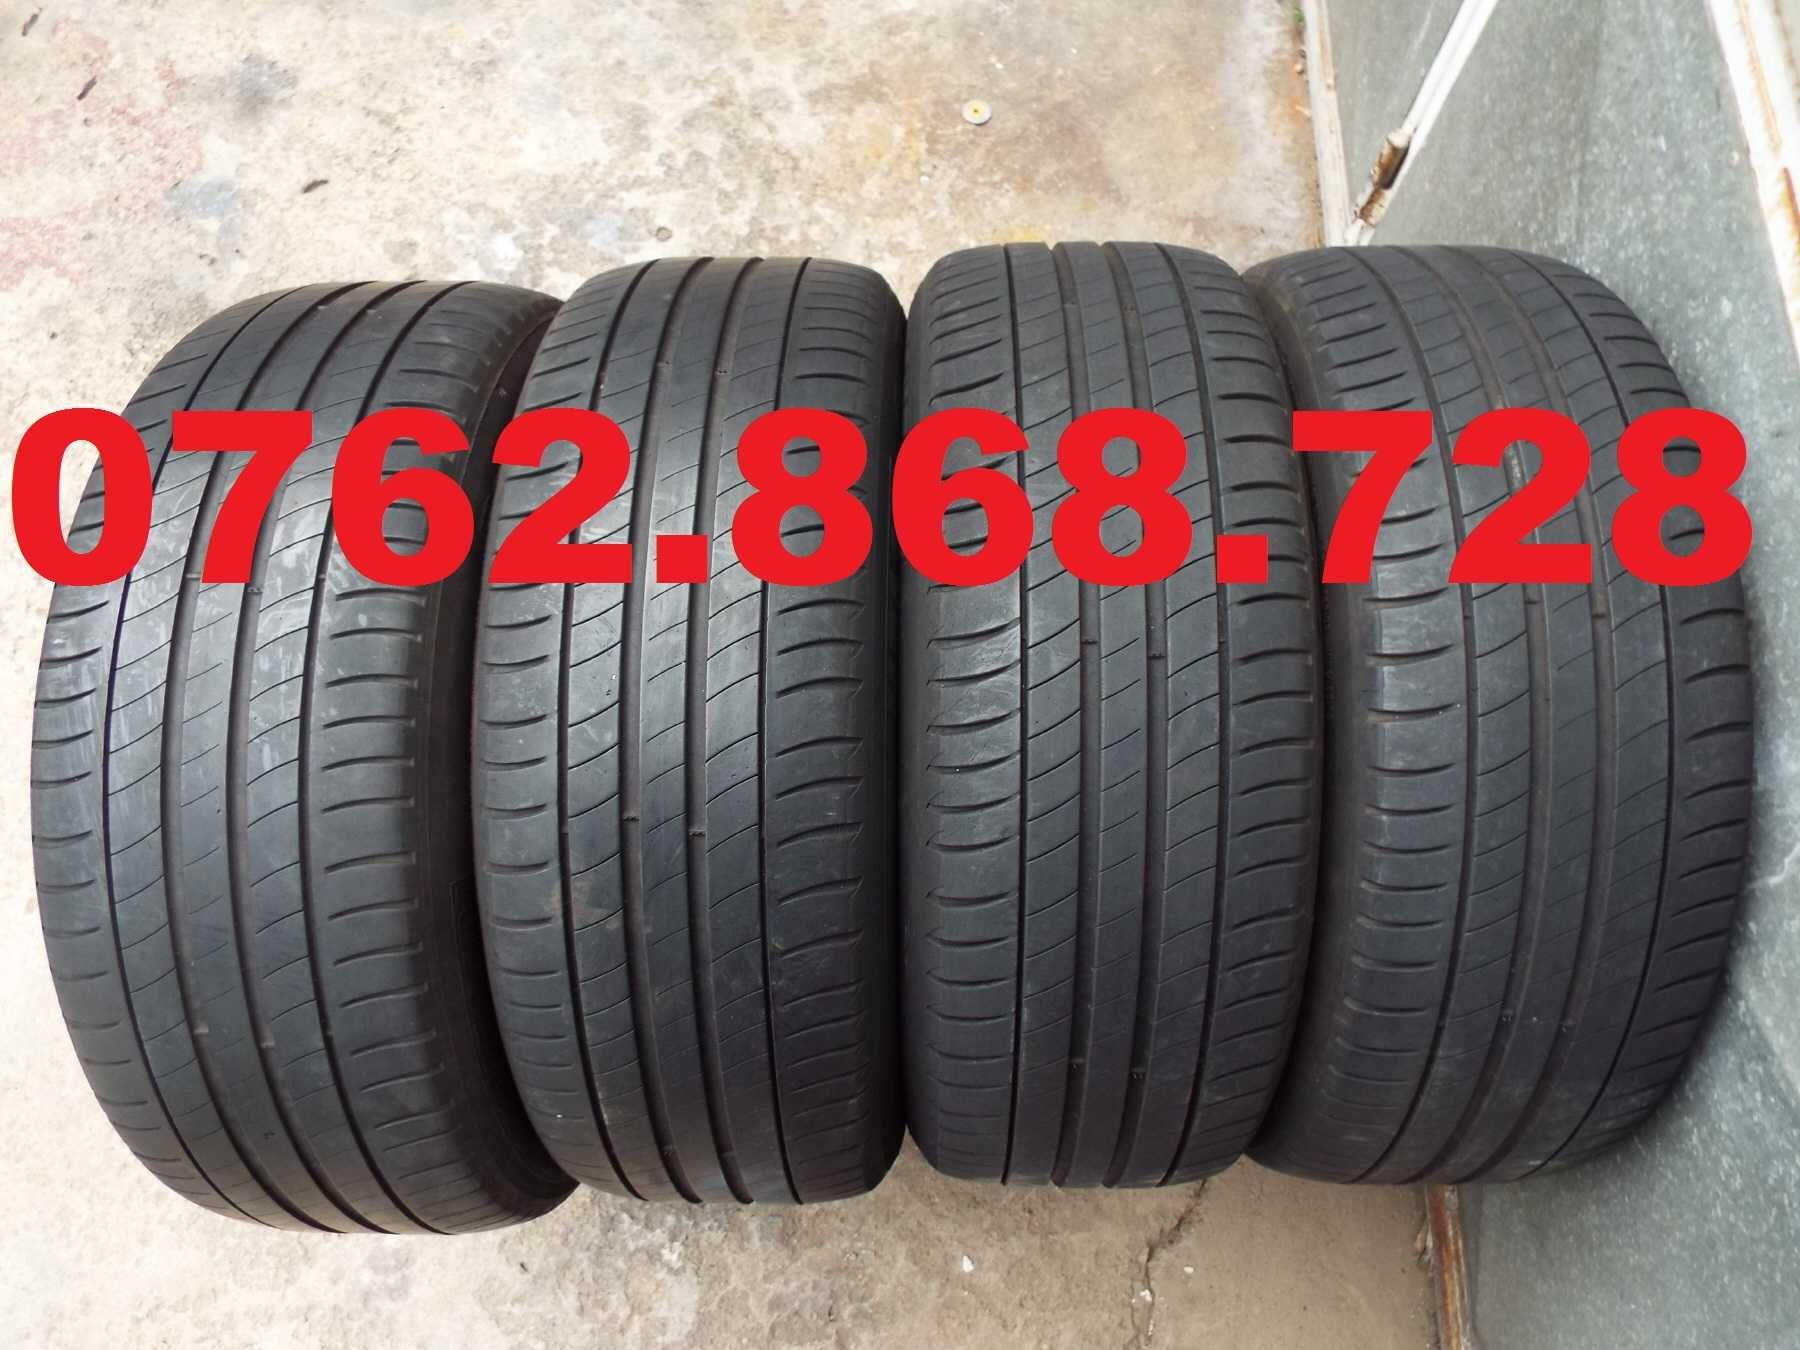 vand 4 anvelope 205/55/16 michelin primacy3 pret 600ron toate4